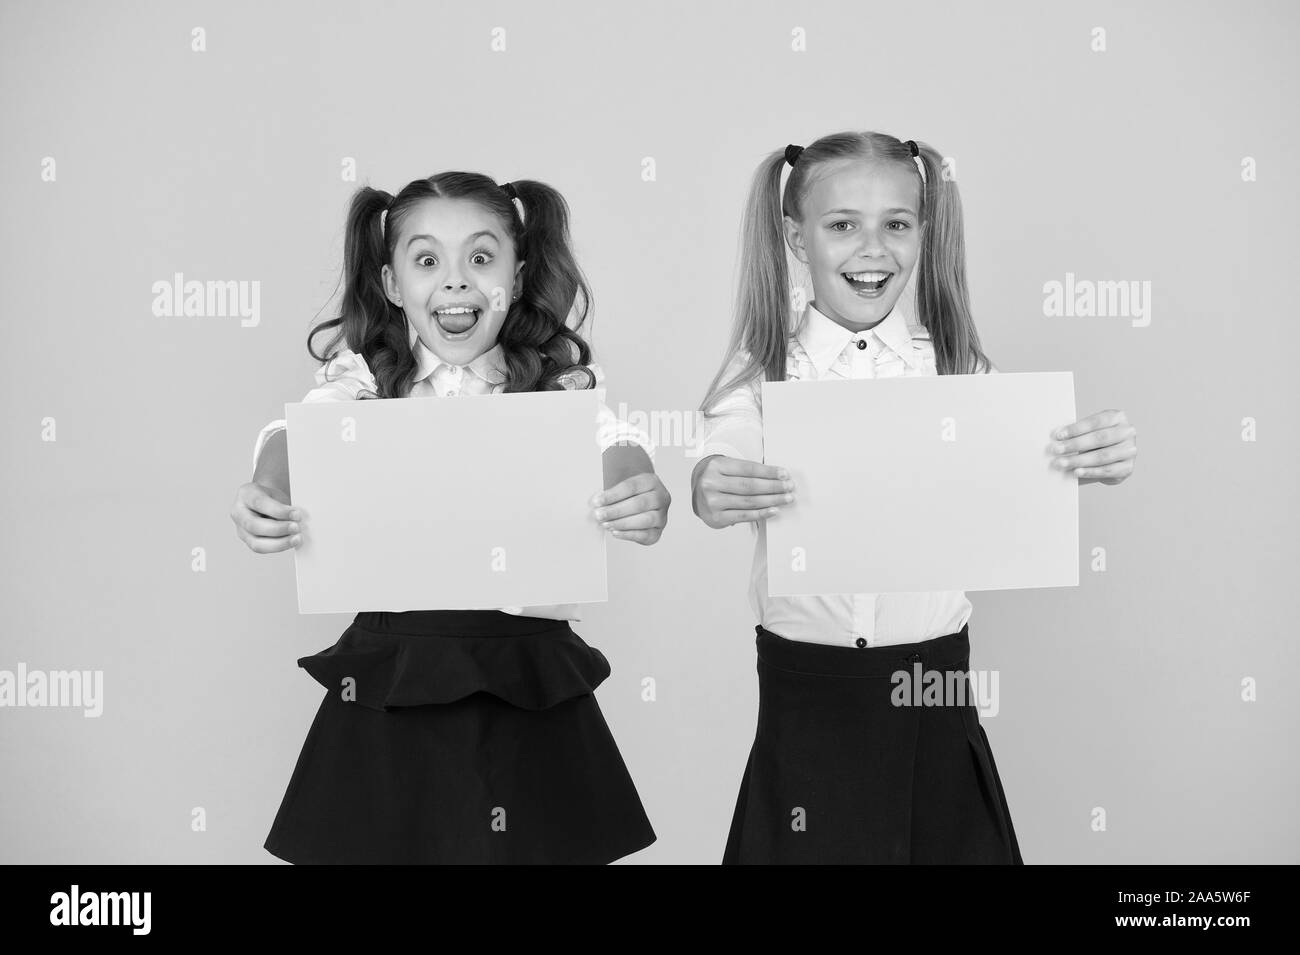 Advertising idea for school. Happy girls holding paper sheets for certain idea on yellow background. Small cute kids smiling of genius idea. Little children with empty paper for your idea, copy space. Stock Photo